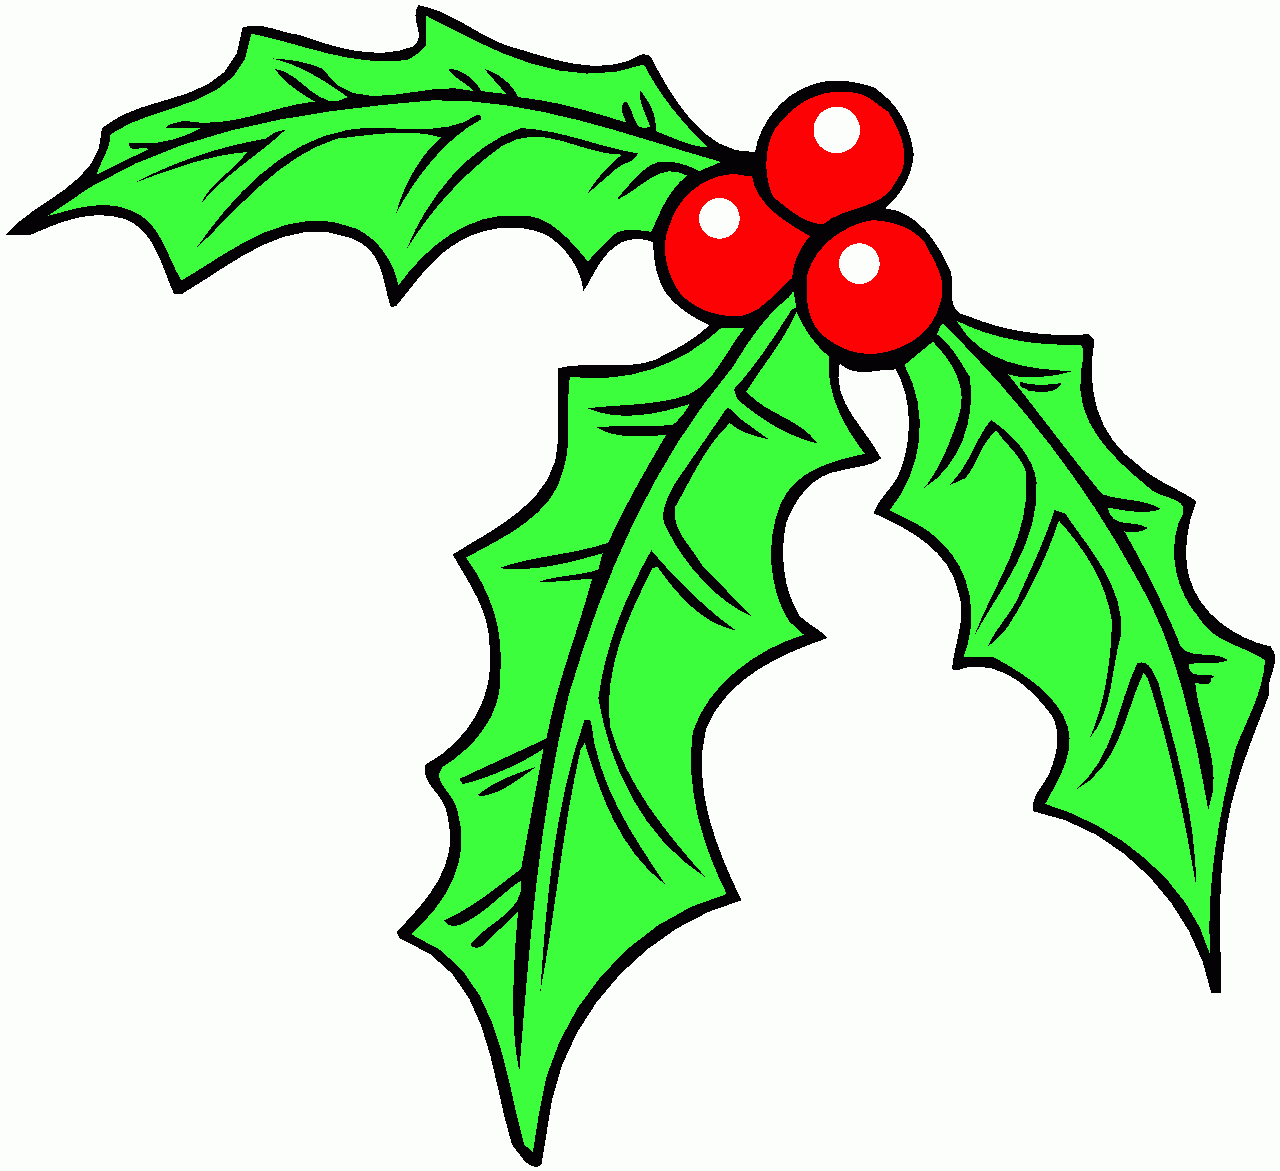 Xmas Stuff For > Christmas Lights Images Clip Art